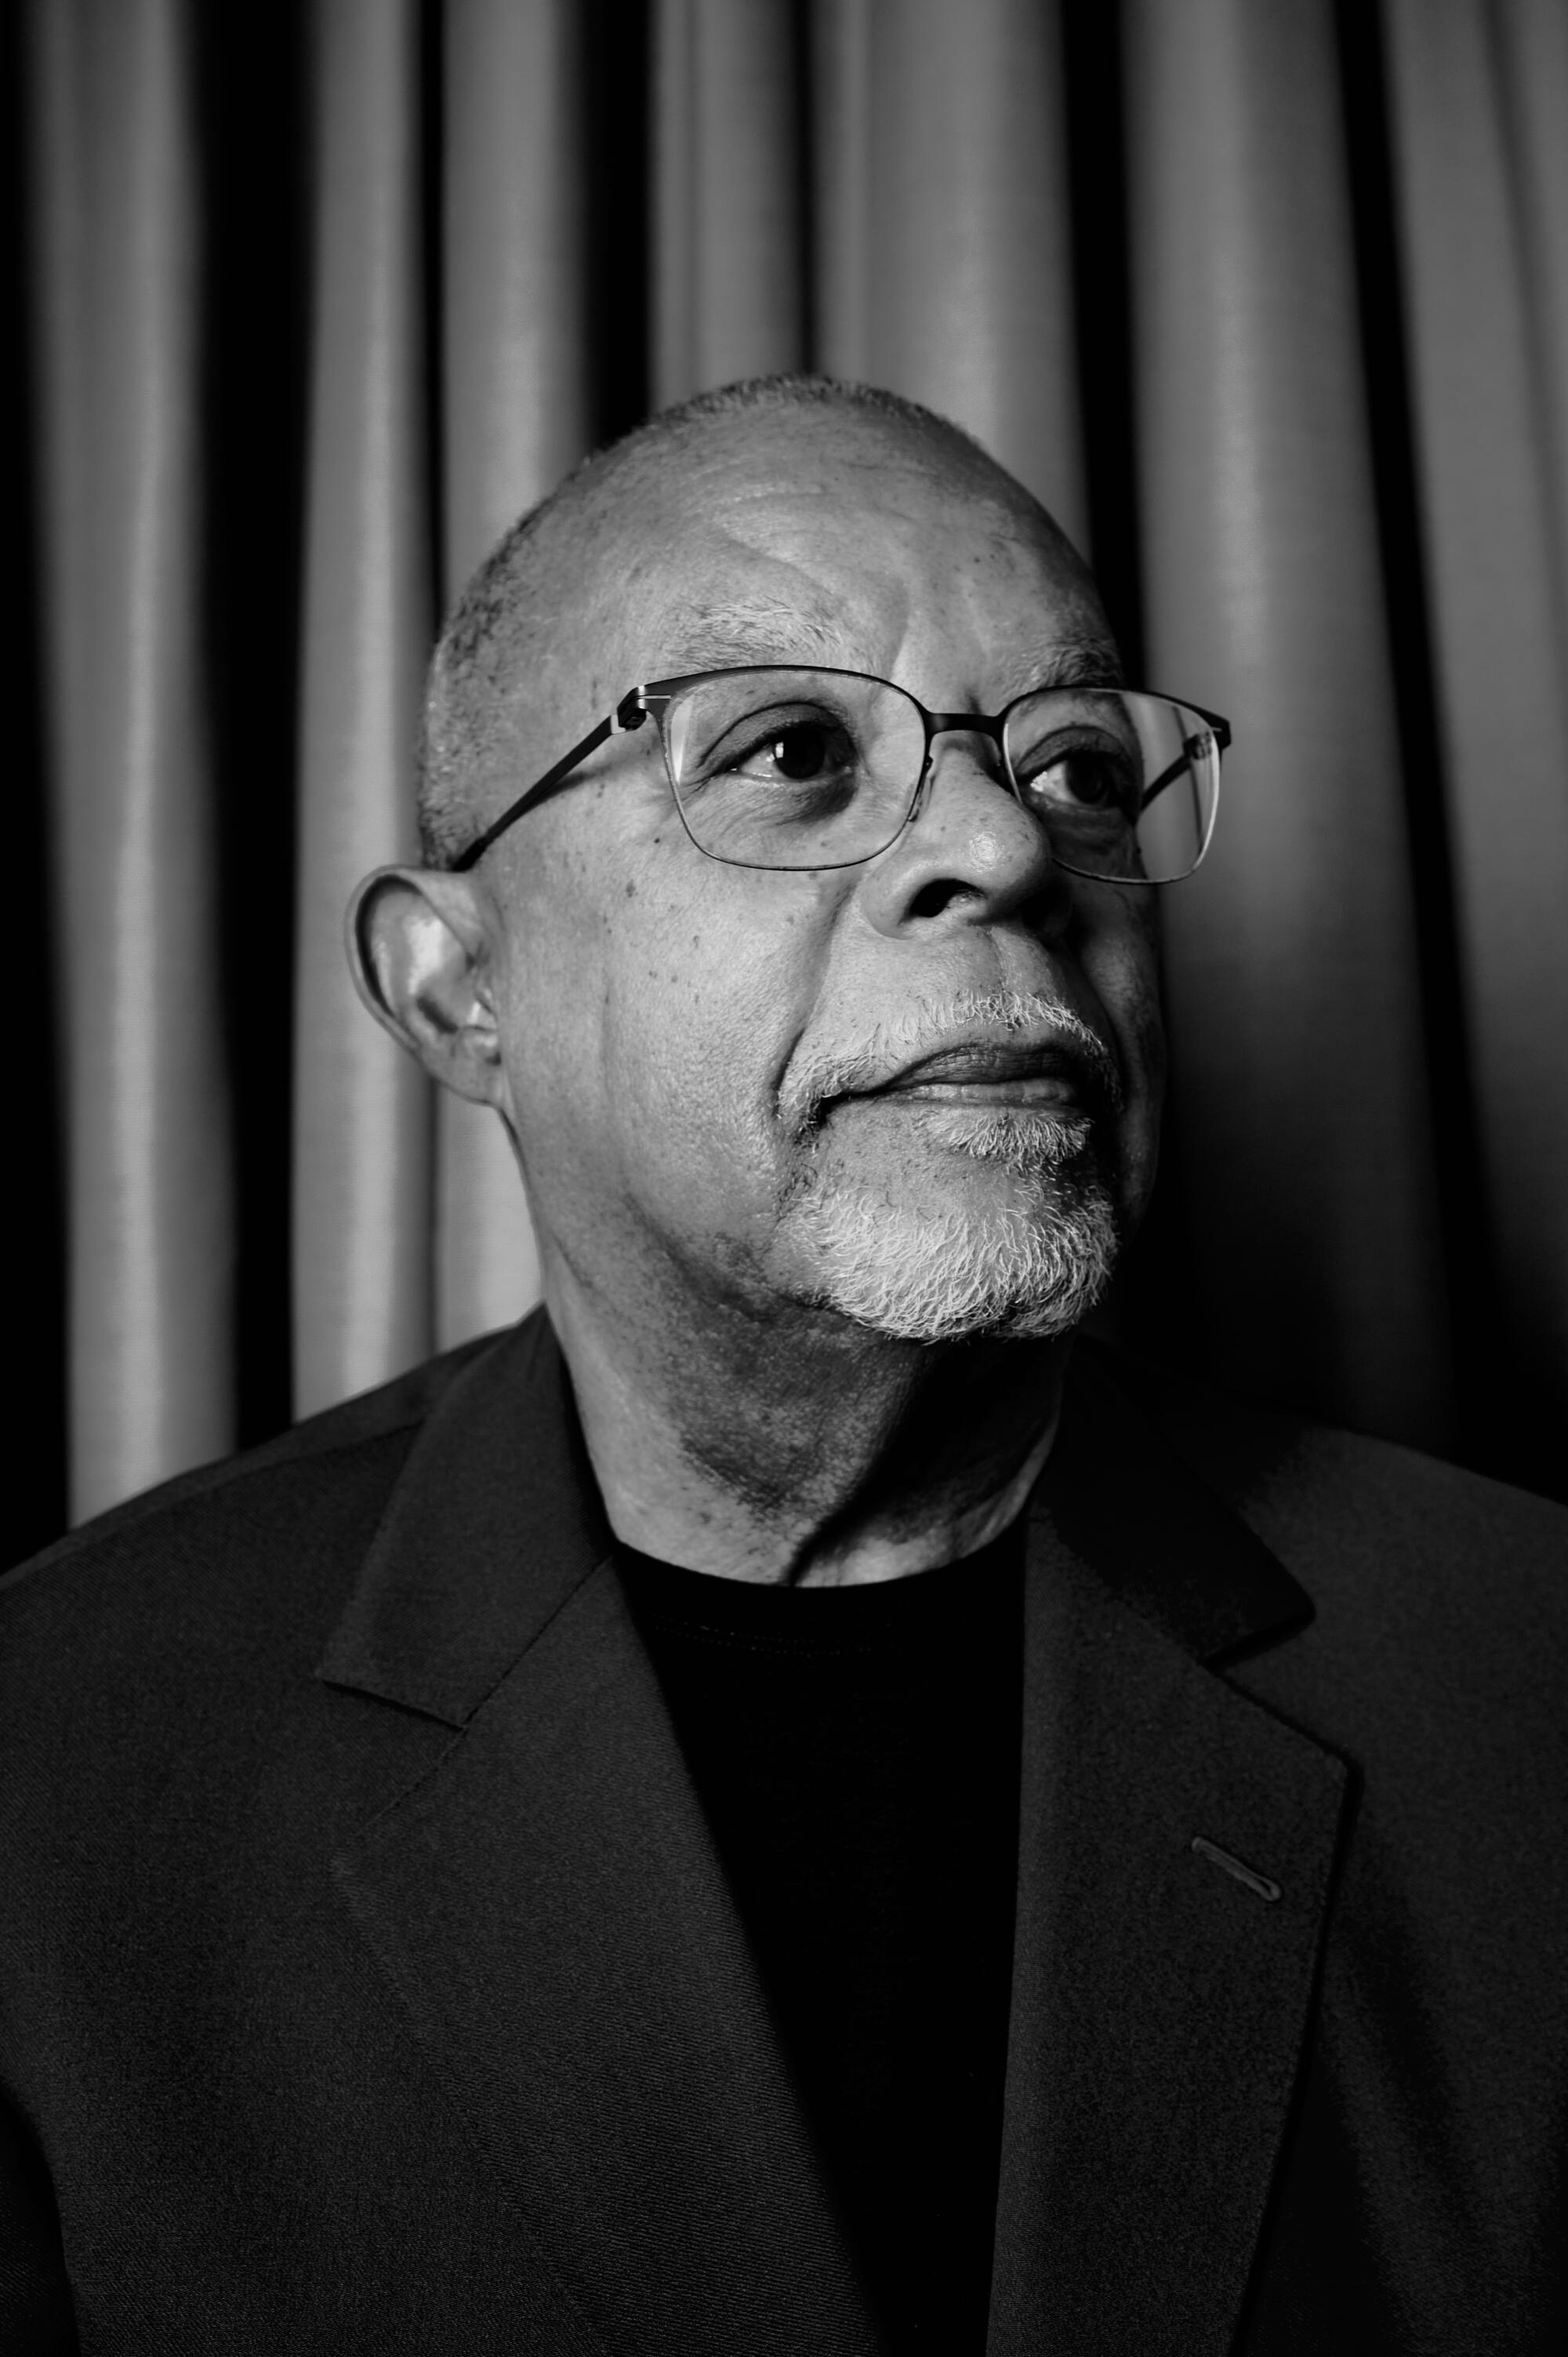 A black-and-white photo portrait of man with shaved head, glasses and goatee.